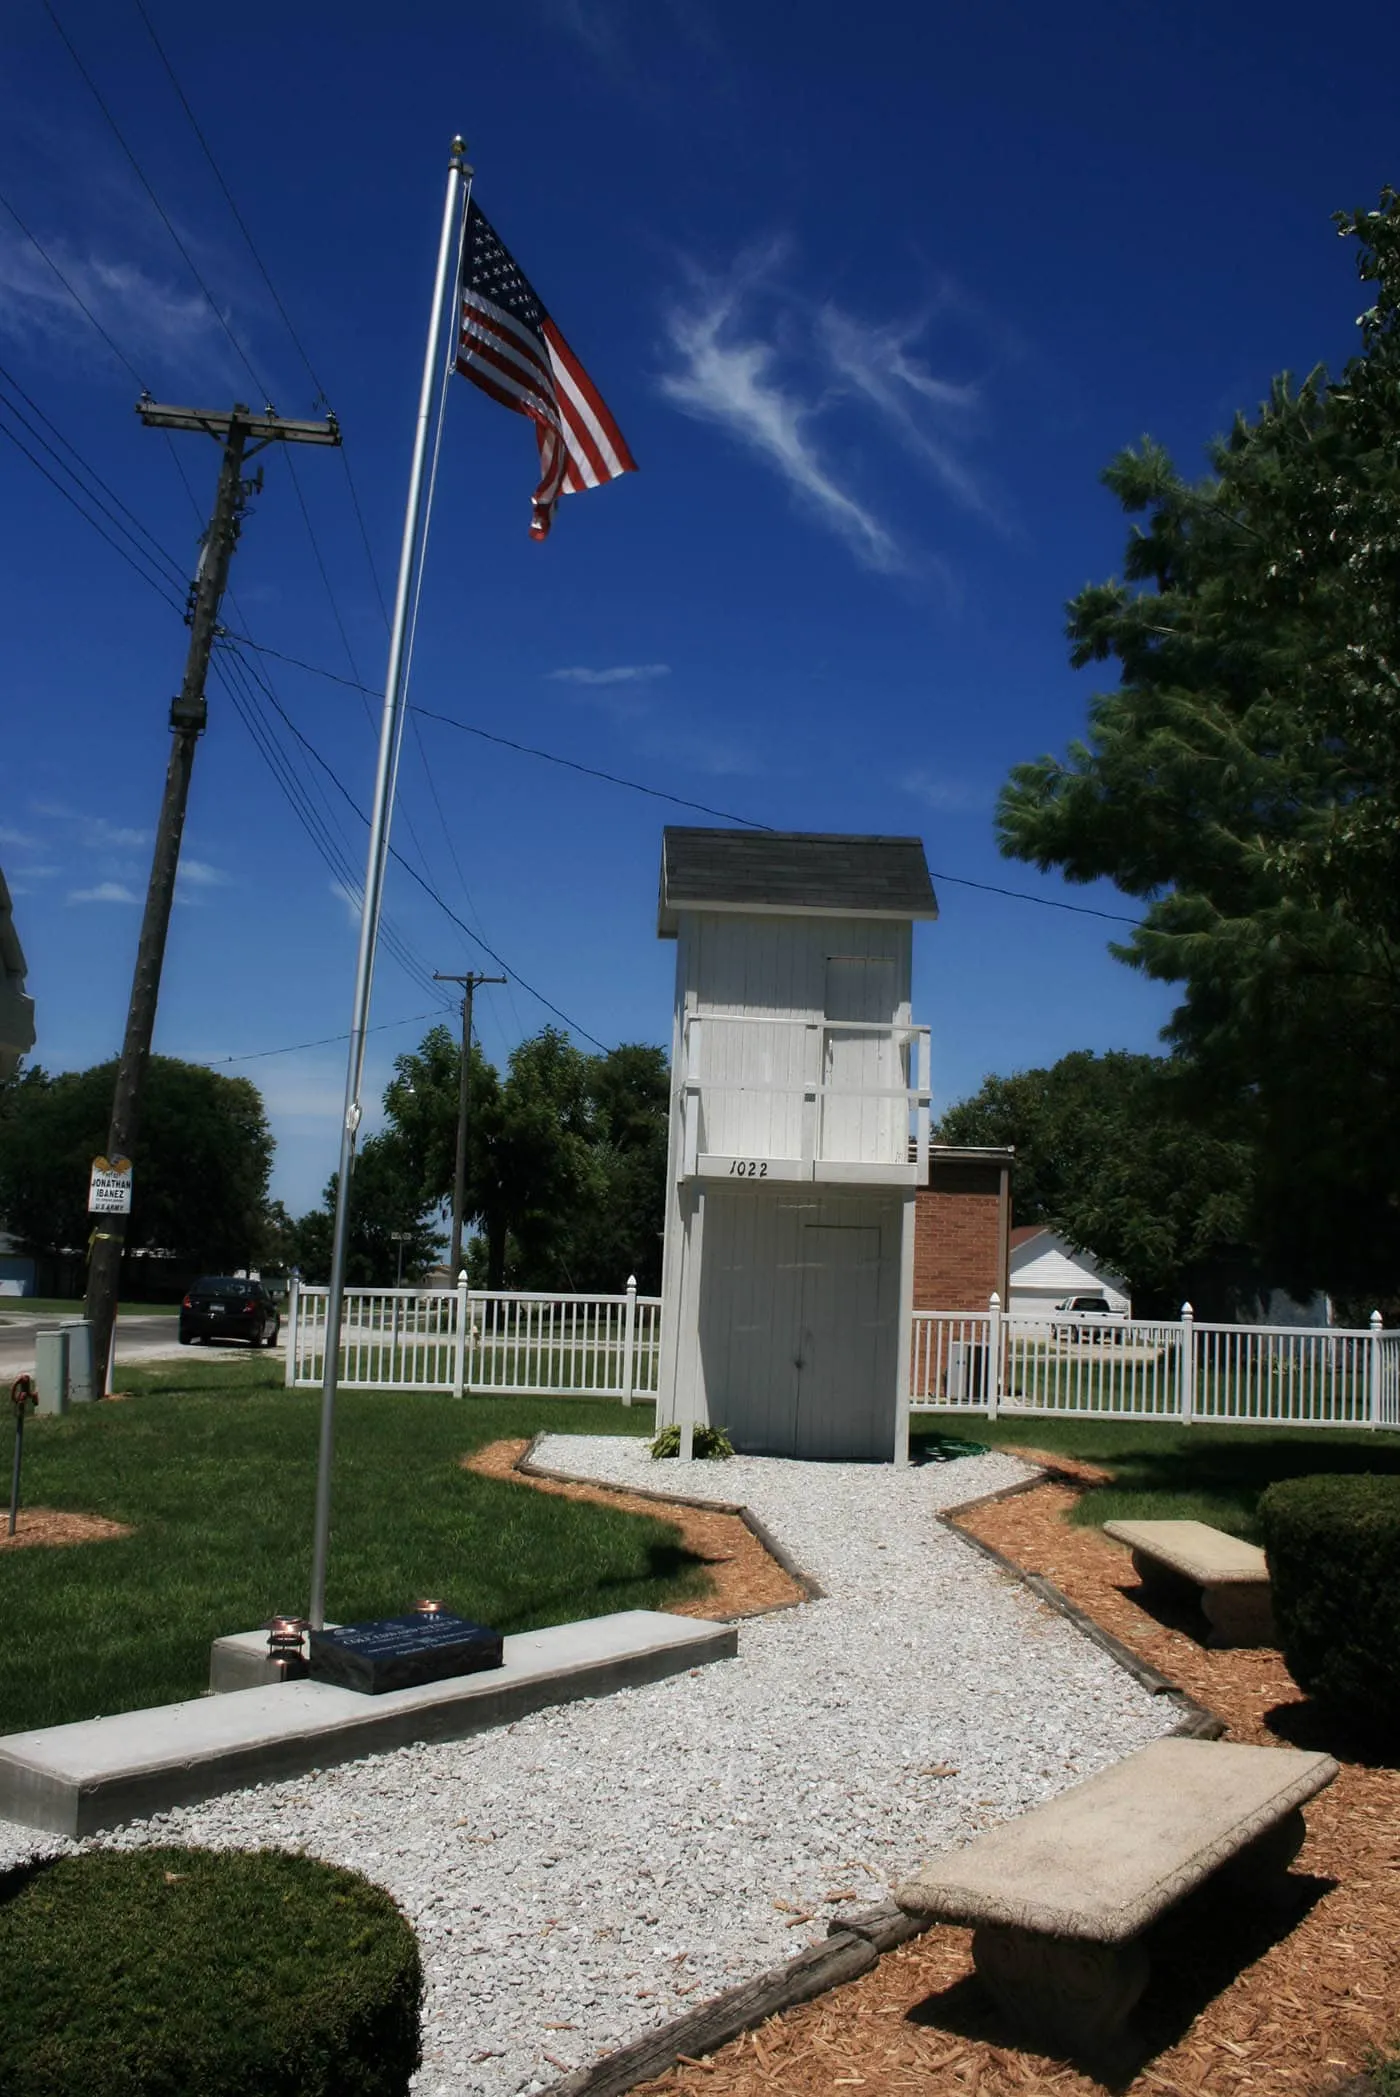 Two-Story Outhouse in Gays, Illinois